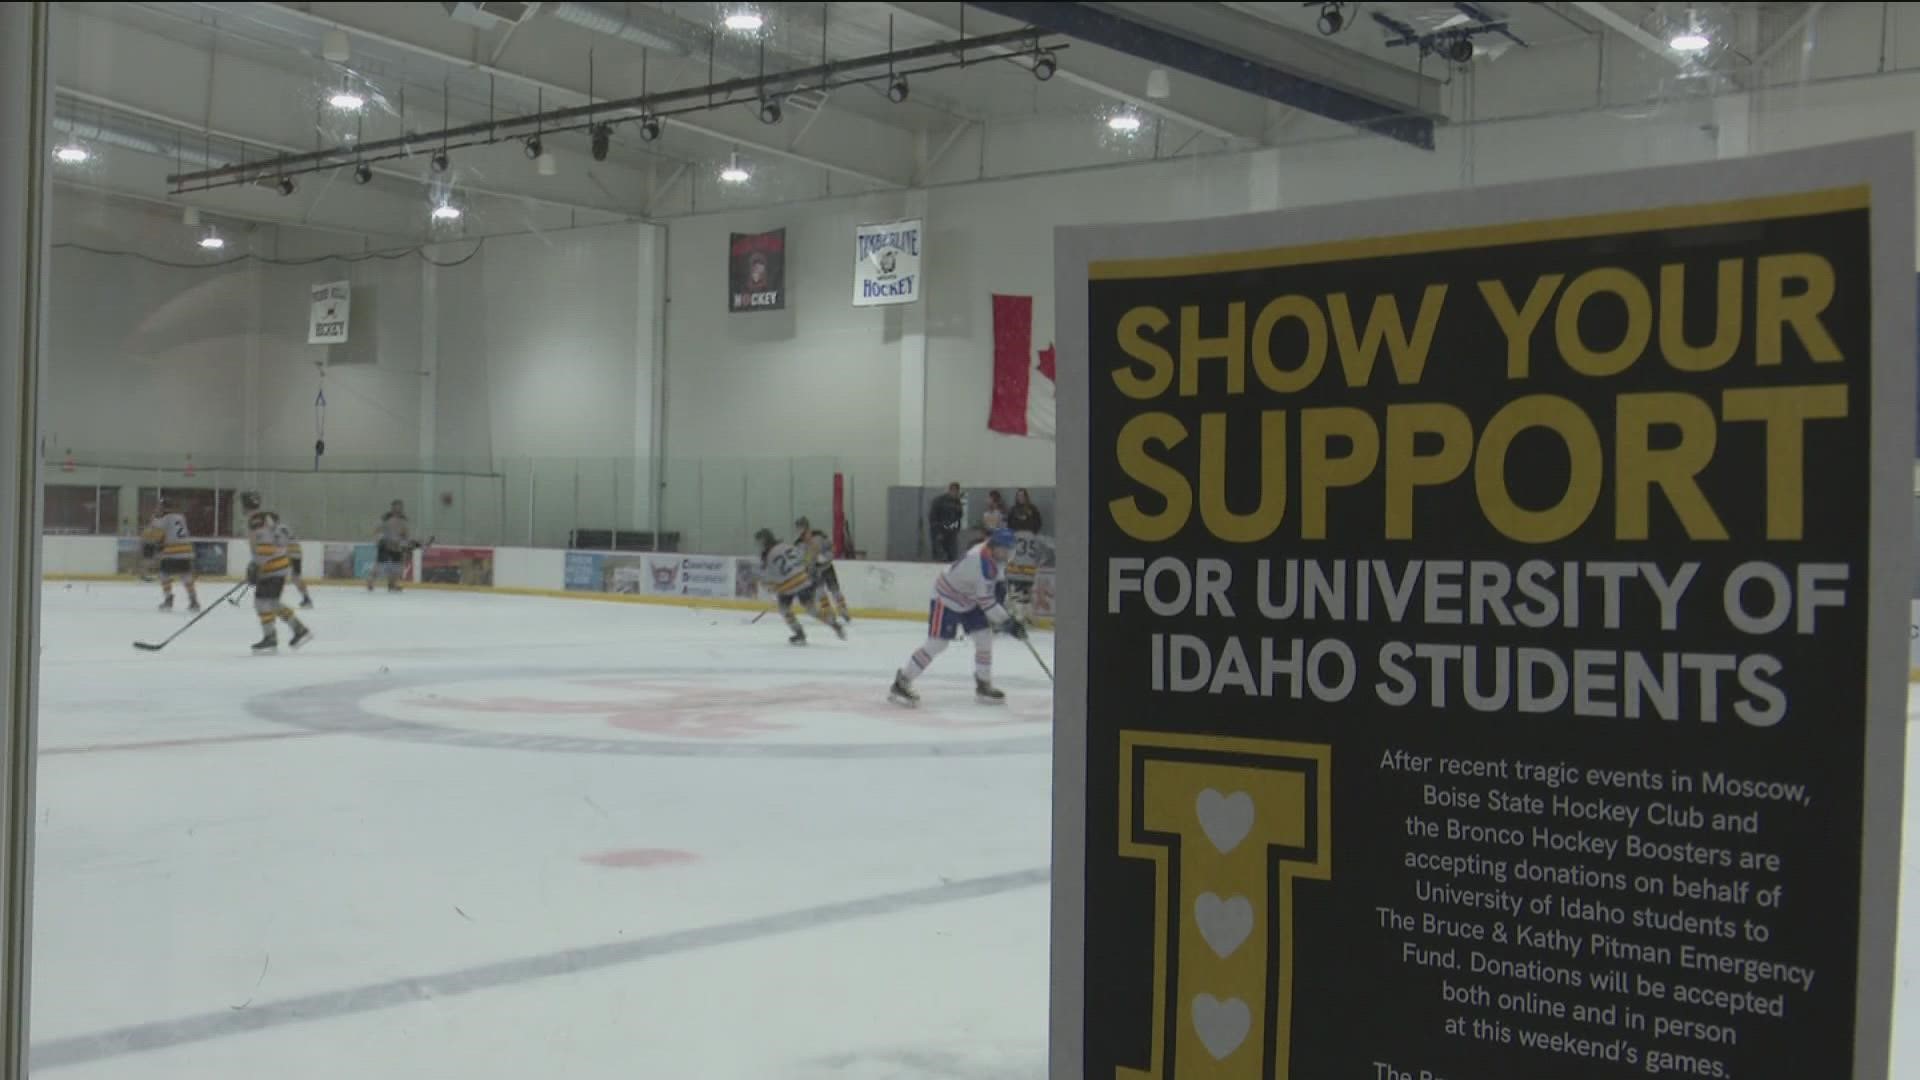 The teams are raising money for the University of Idaho's Bruce & Kathy Pitman Emergency Fund, which provides financial assistance to in emergency situations.